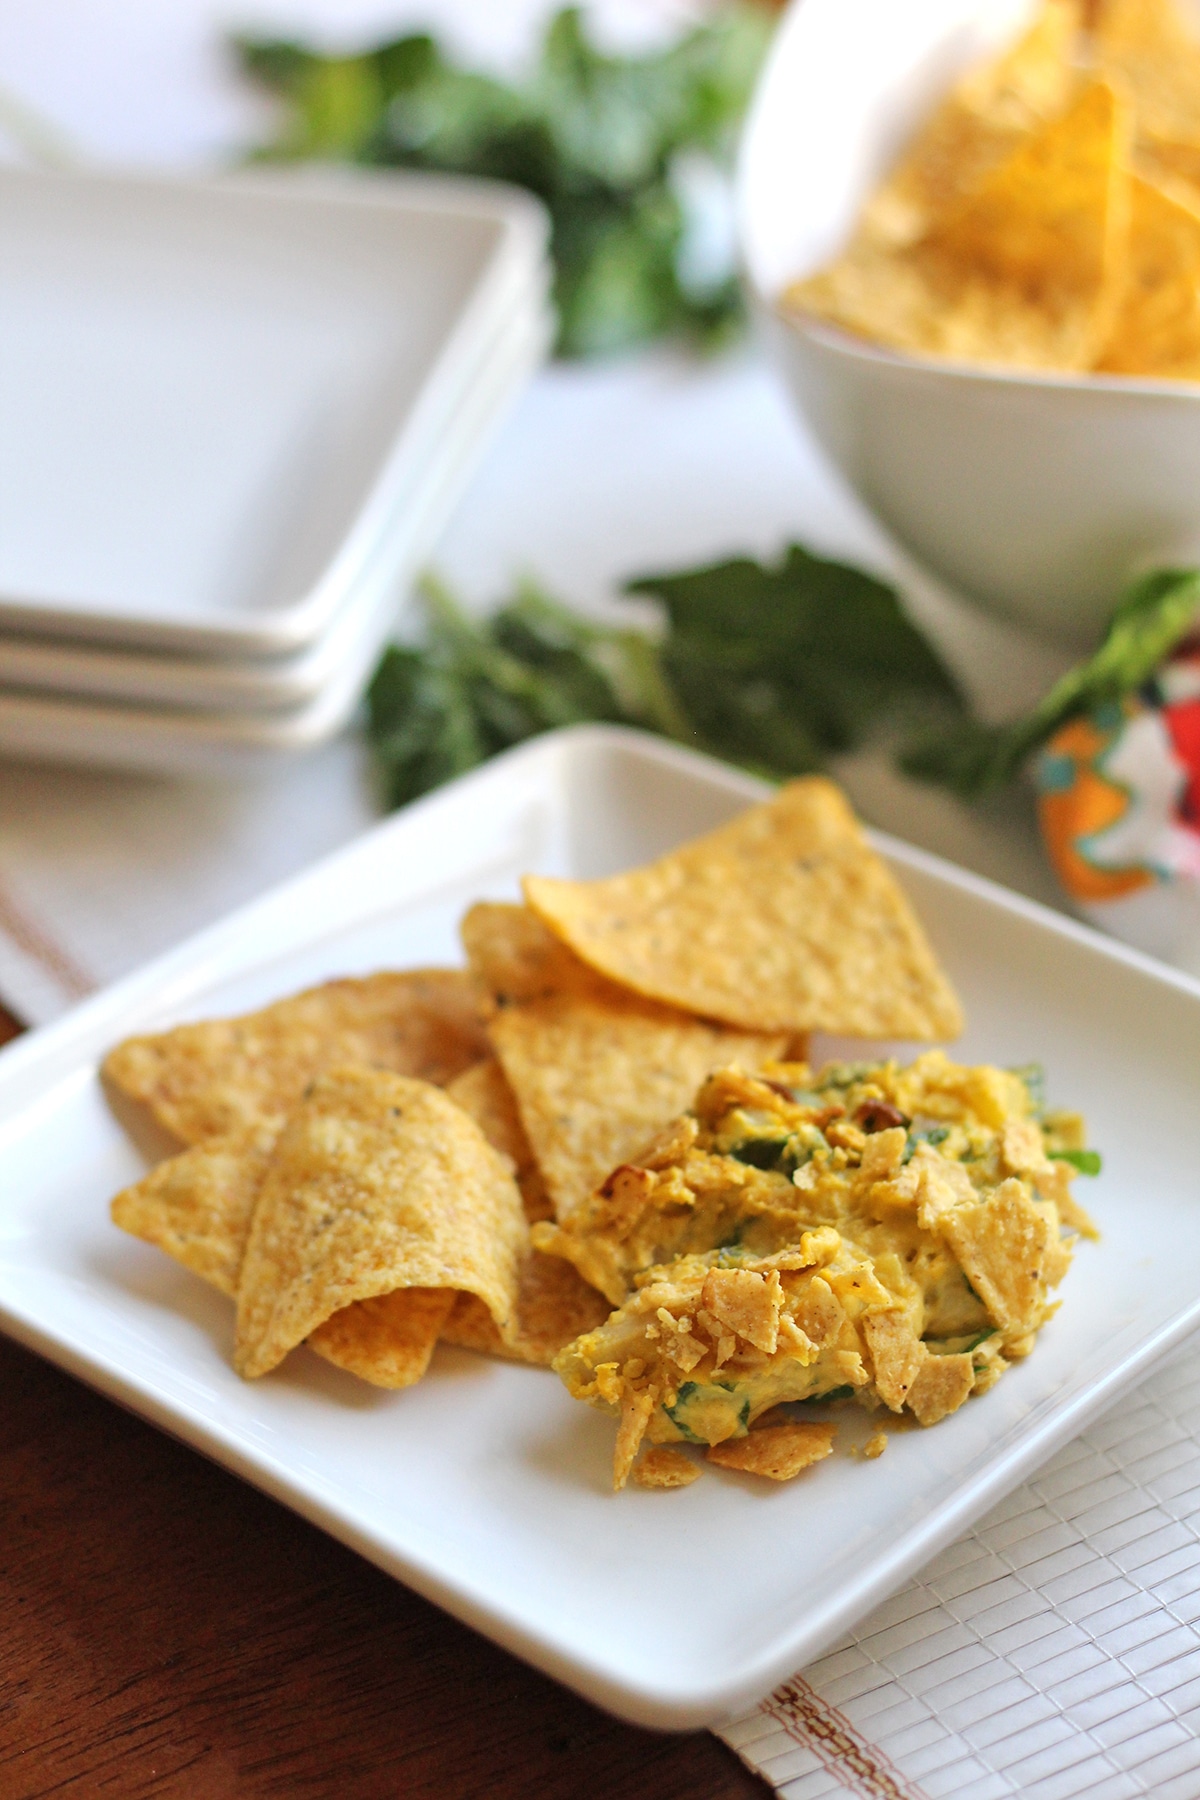 Vegan spinach artichoke dip on plate with tortilla chips.